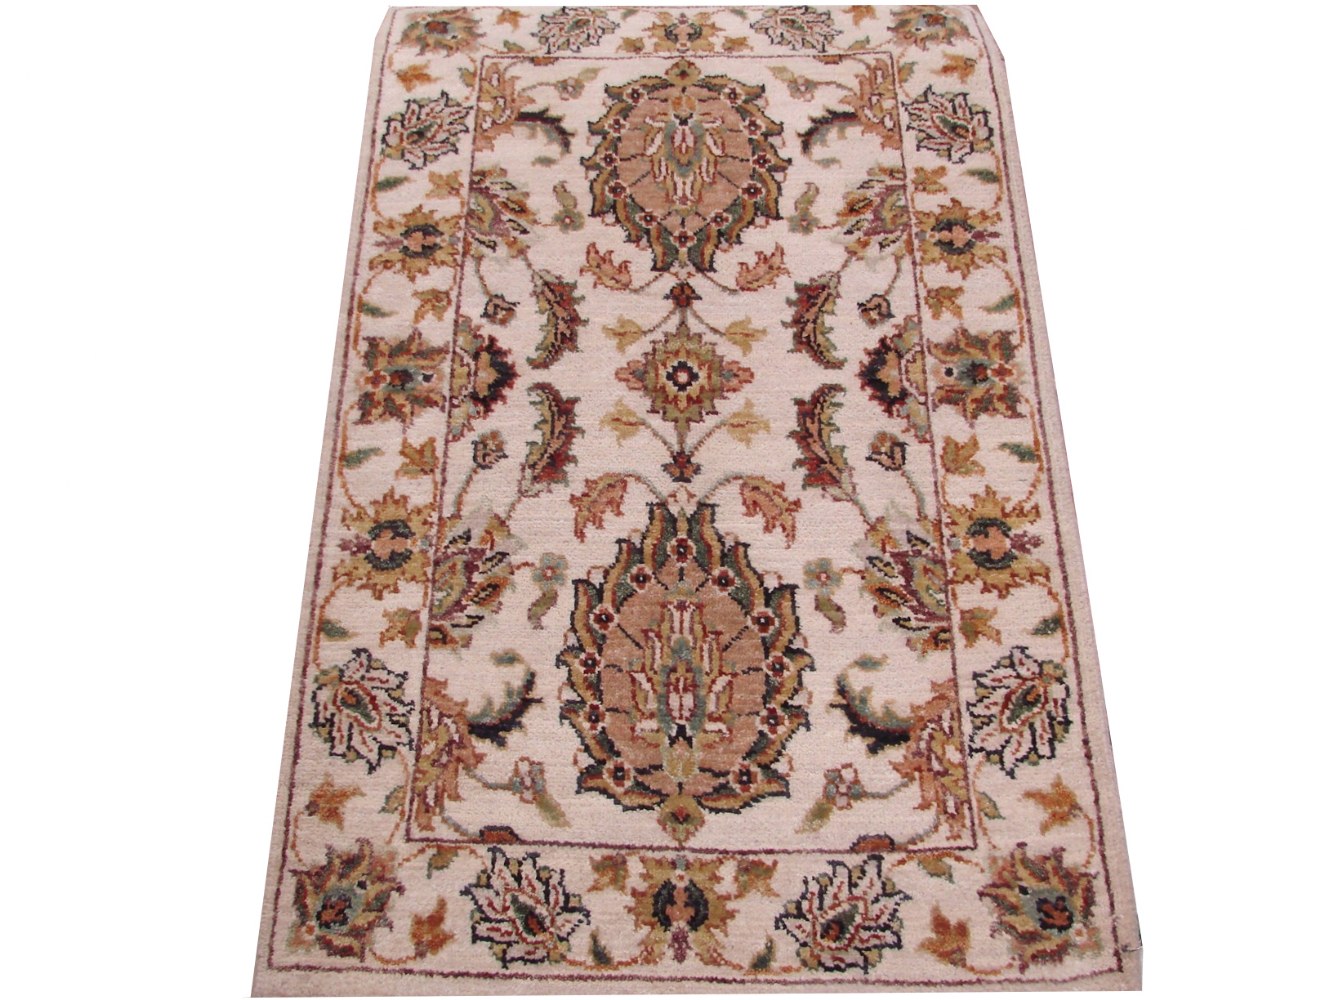 2X3 Traditional Hand Knotted Wool Area Rug - MR15891